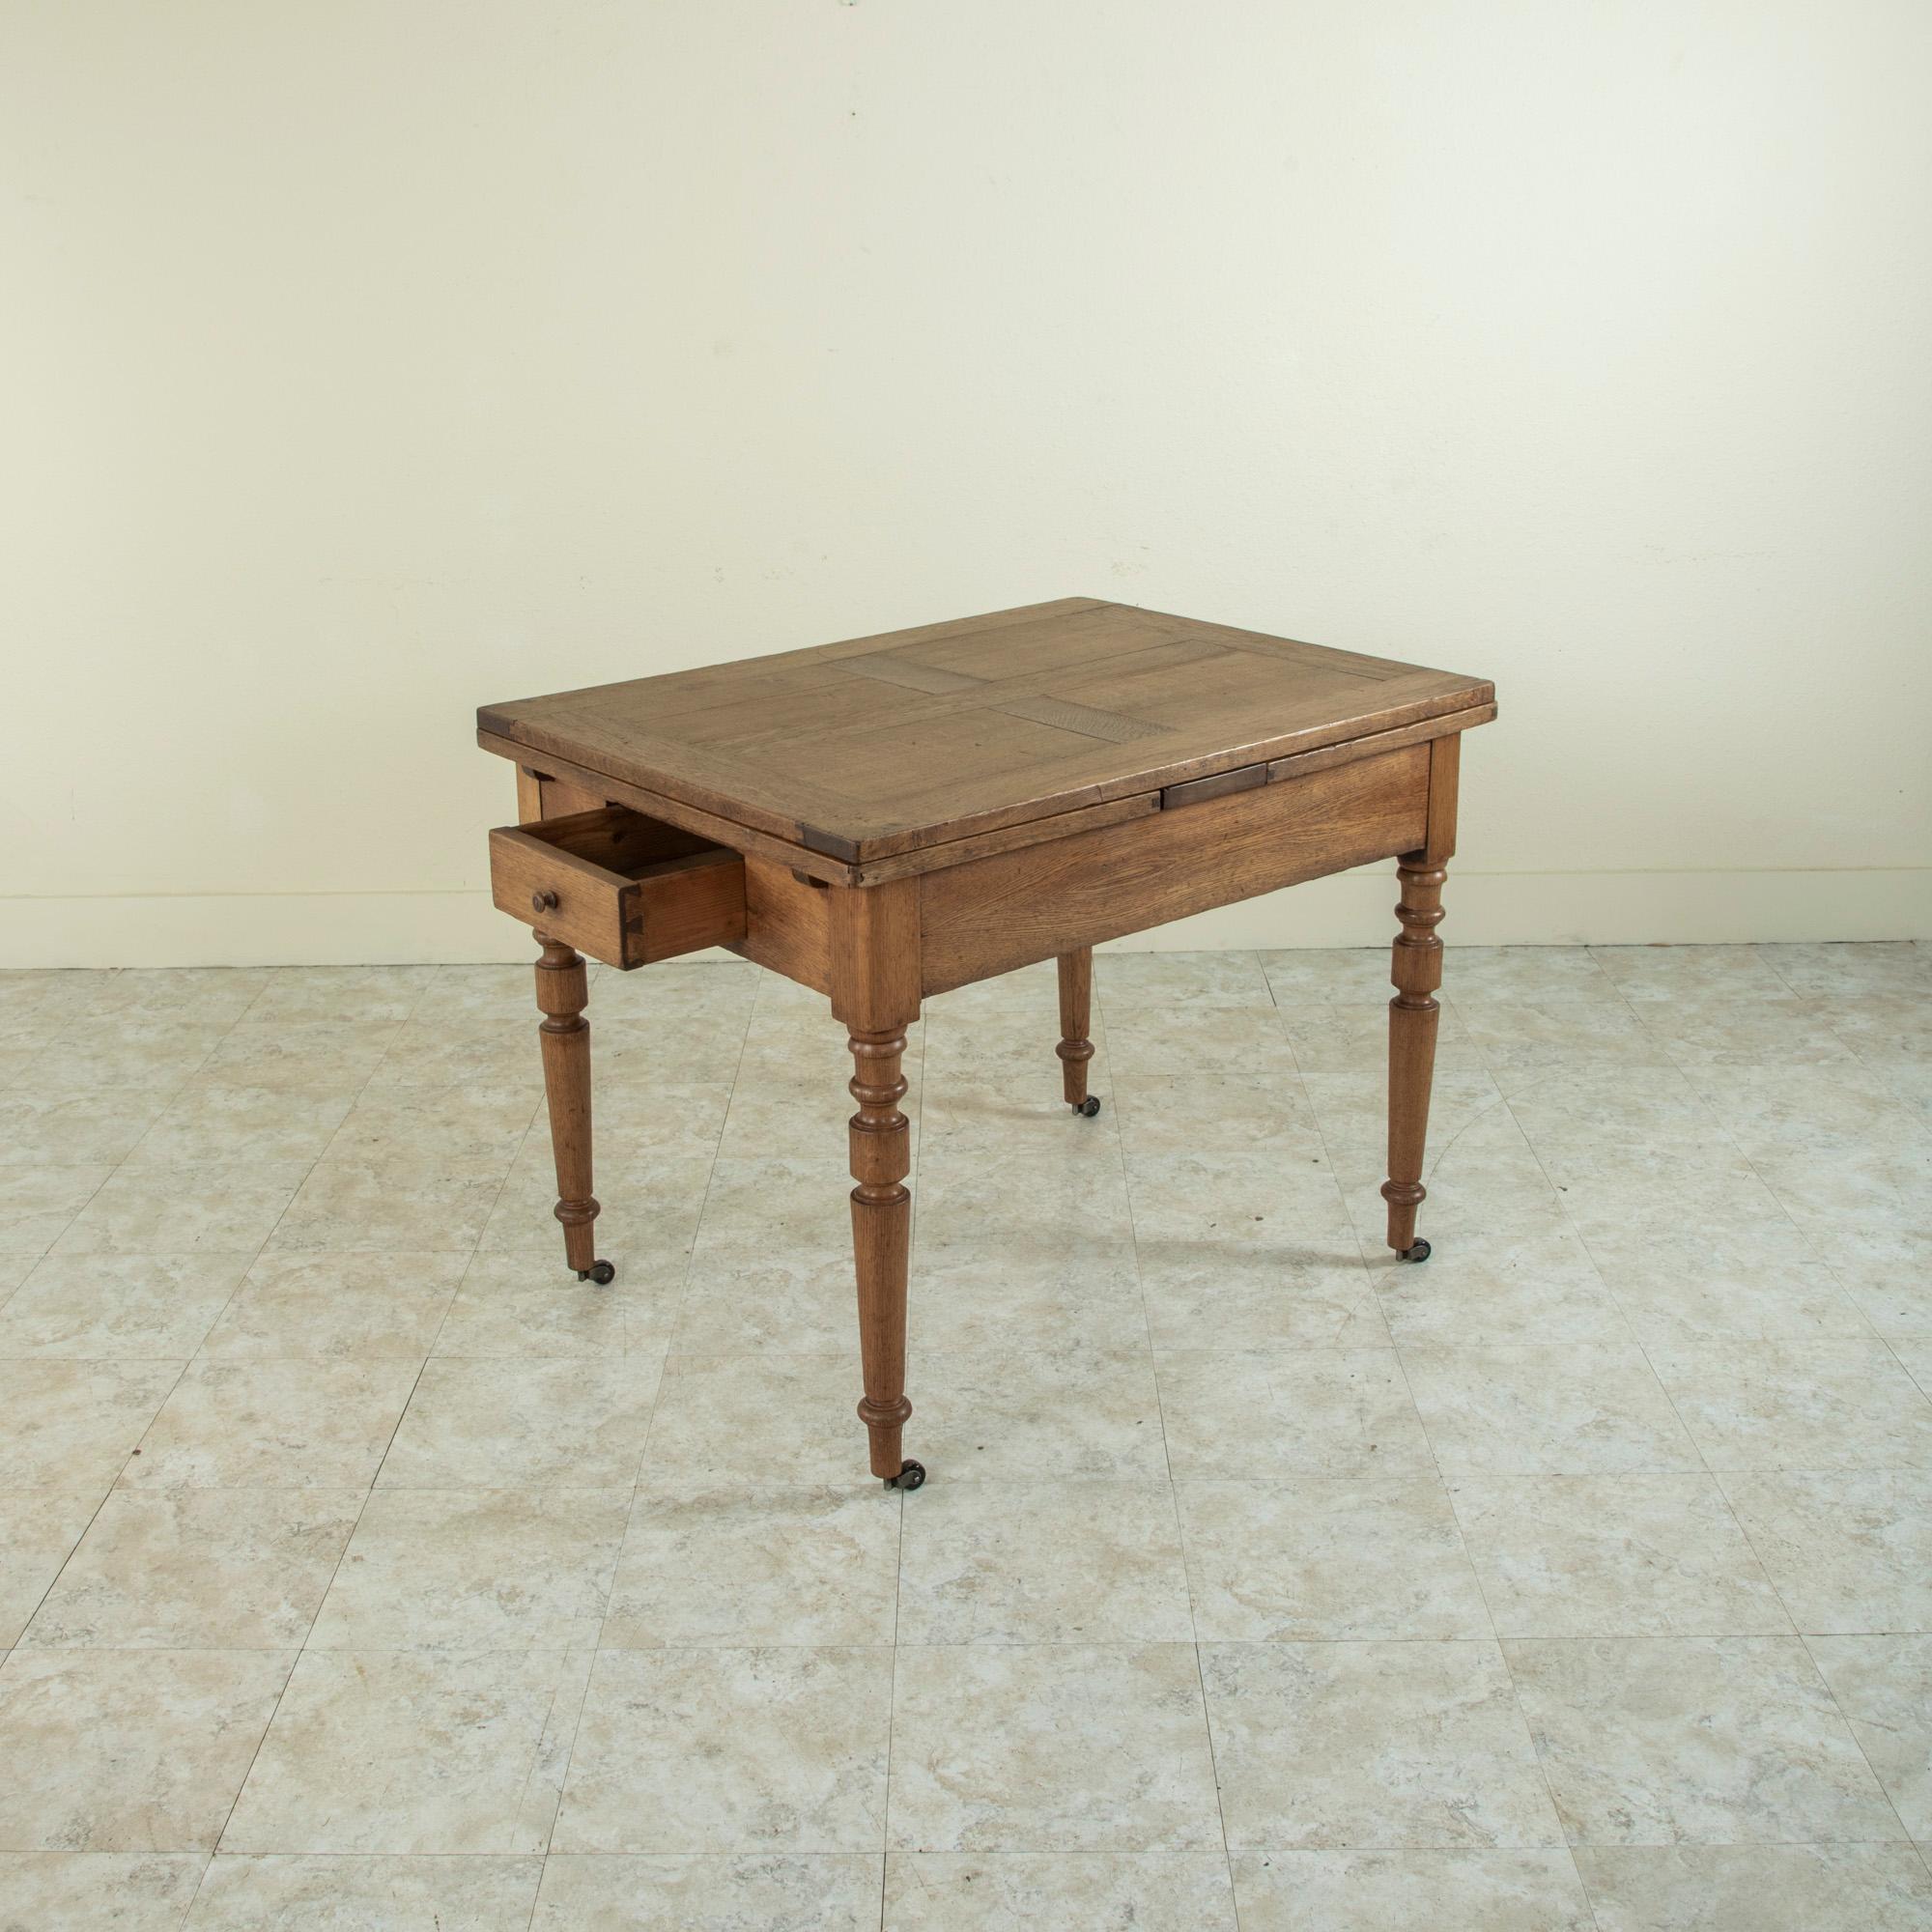 Late 19th Century French Oak Farm Table on Casters with Extendable Leaves 16